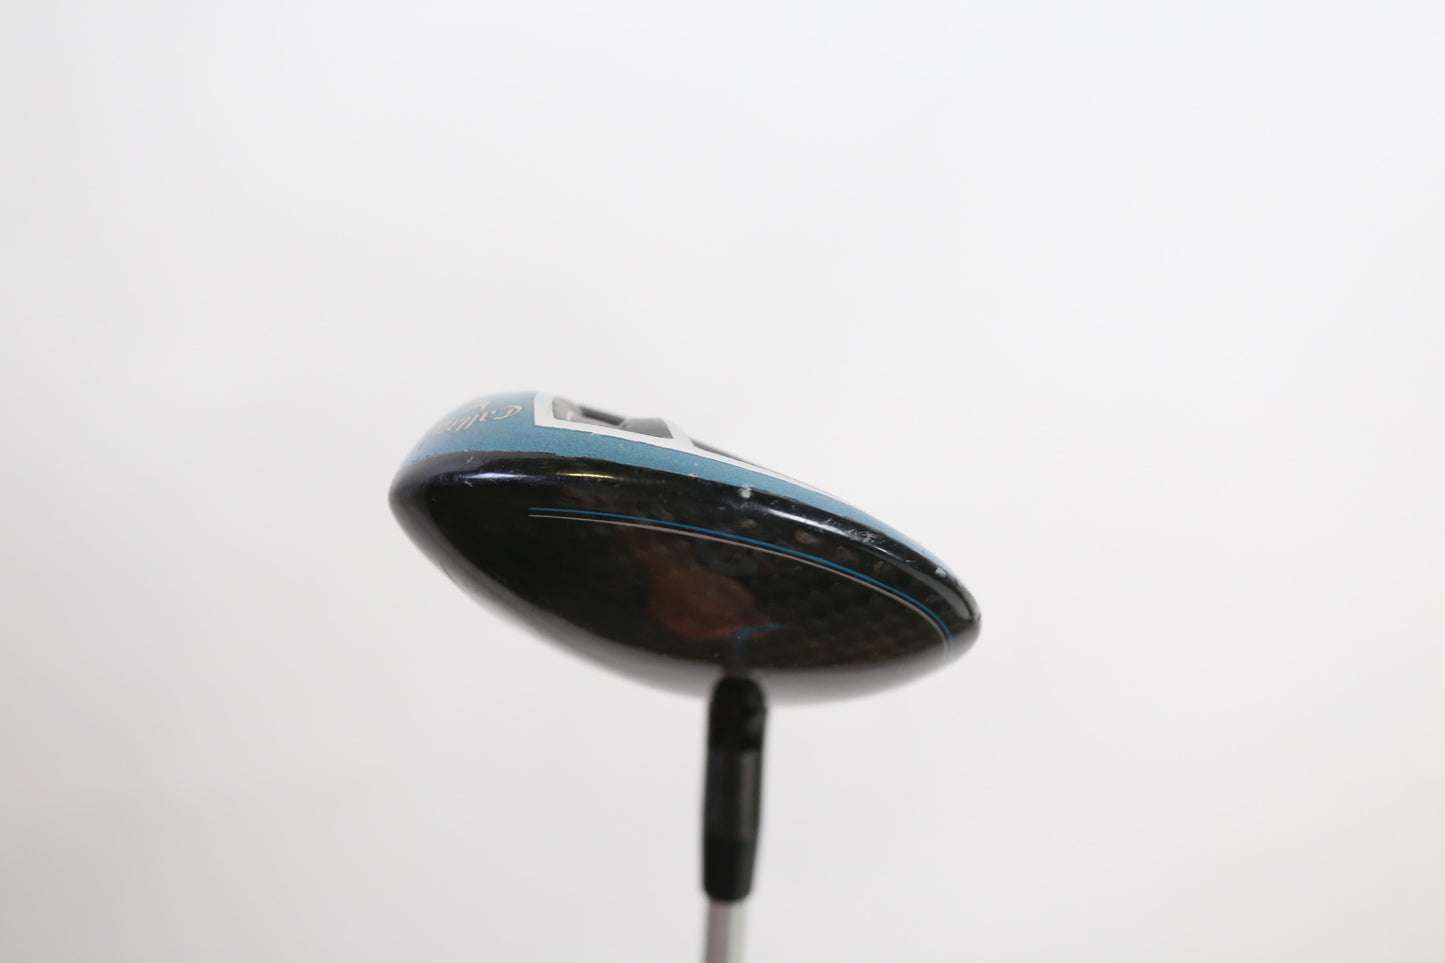 Used Callaway Rogue 5-Wood - Right-Handed - 19 Degrees - Ladies Flex